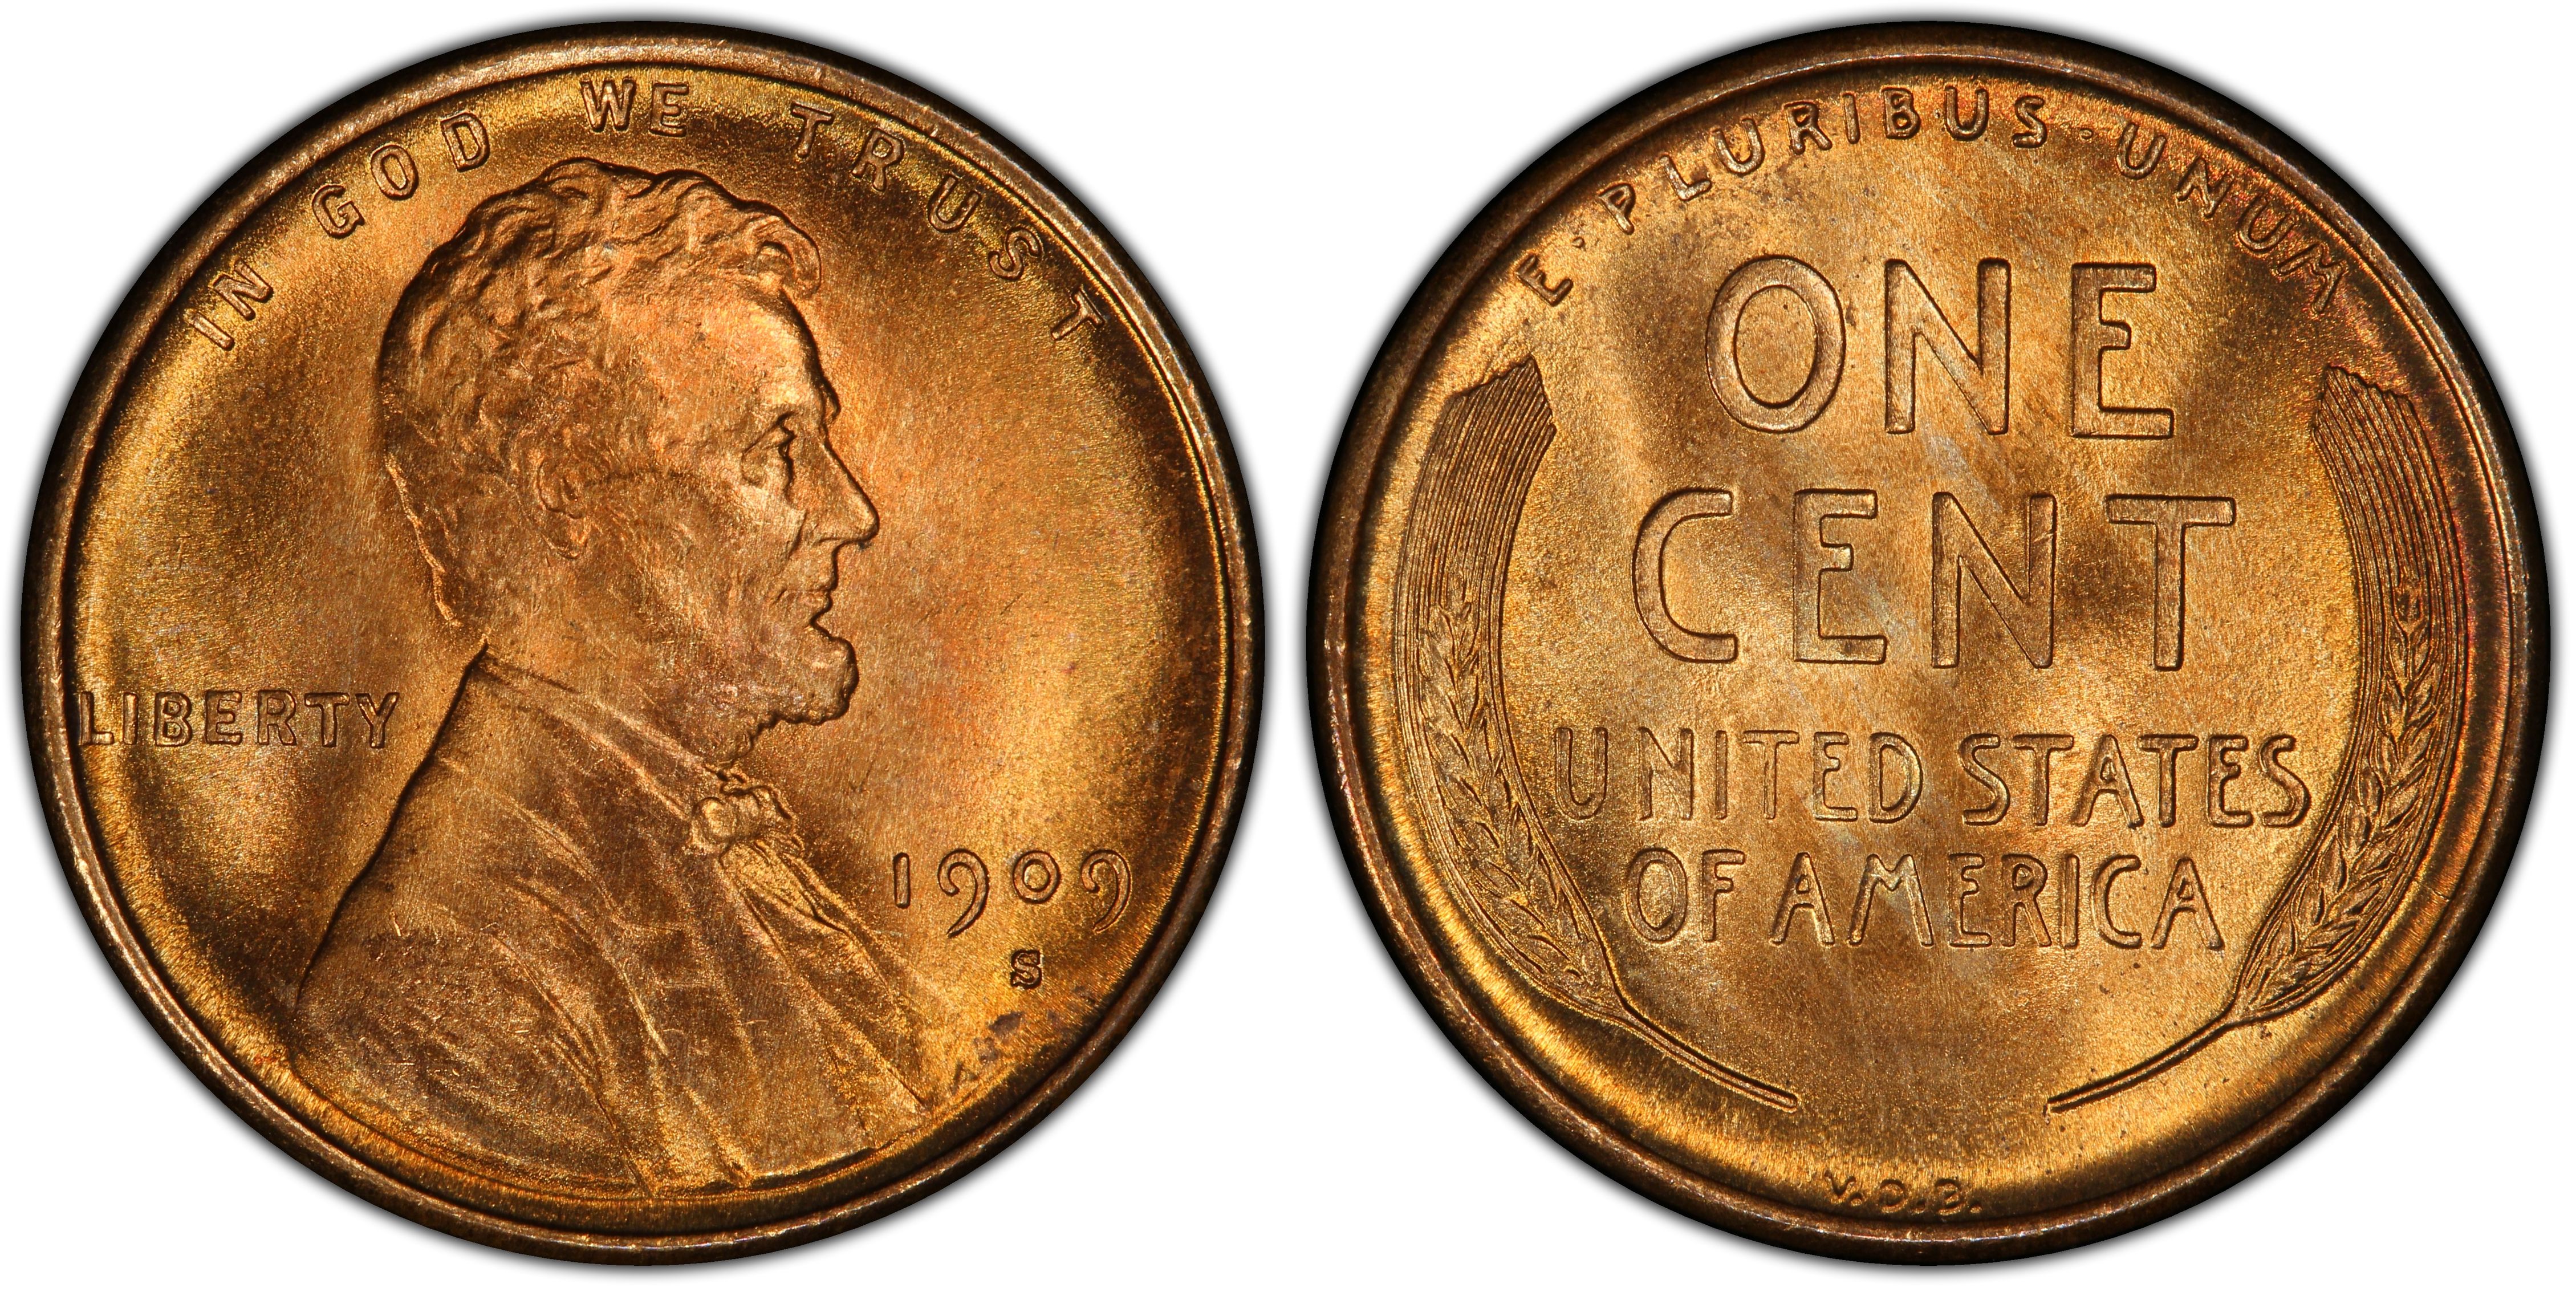 1909 penny on rover mars